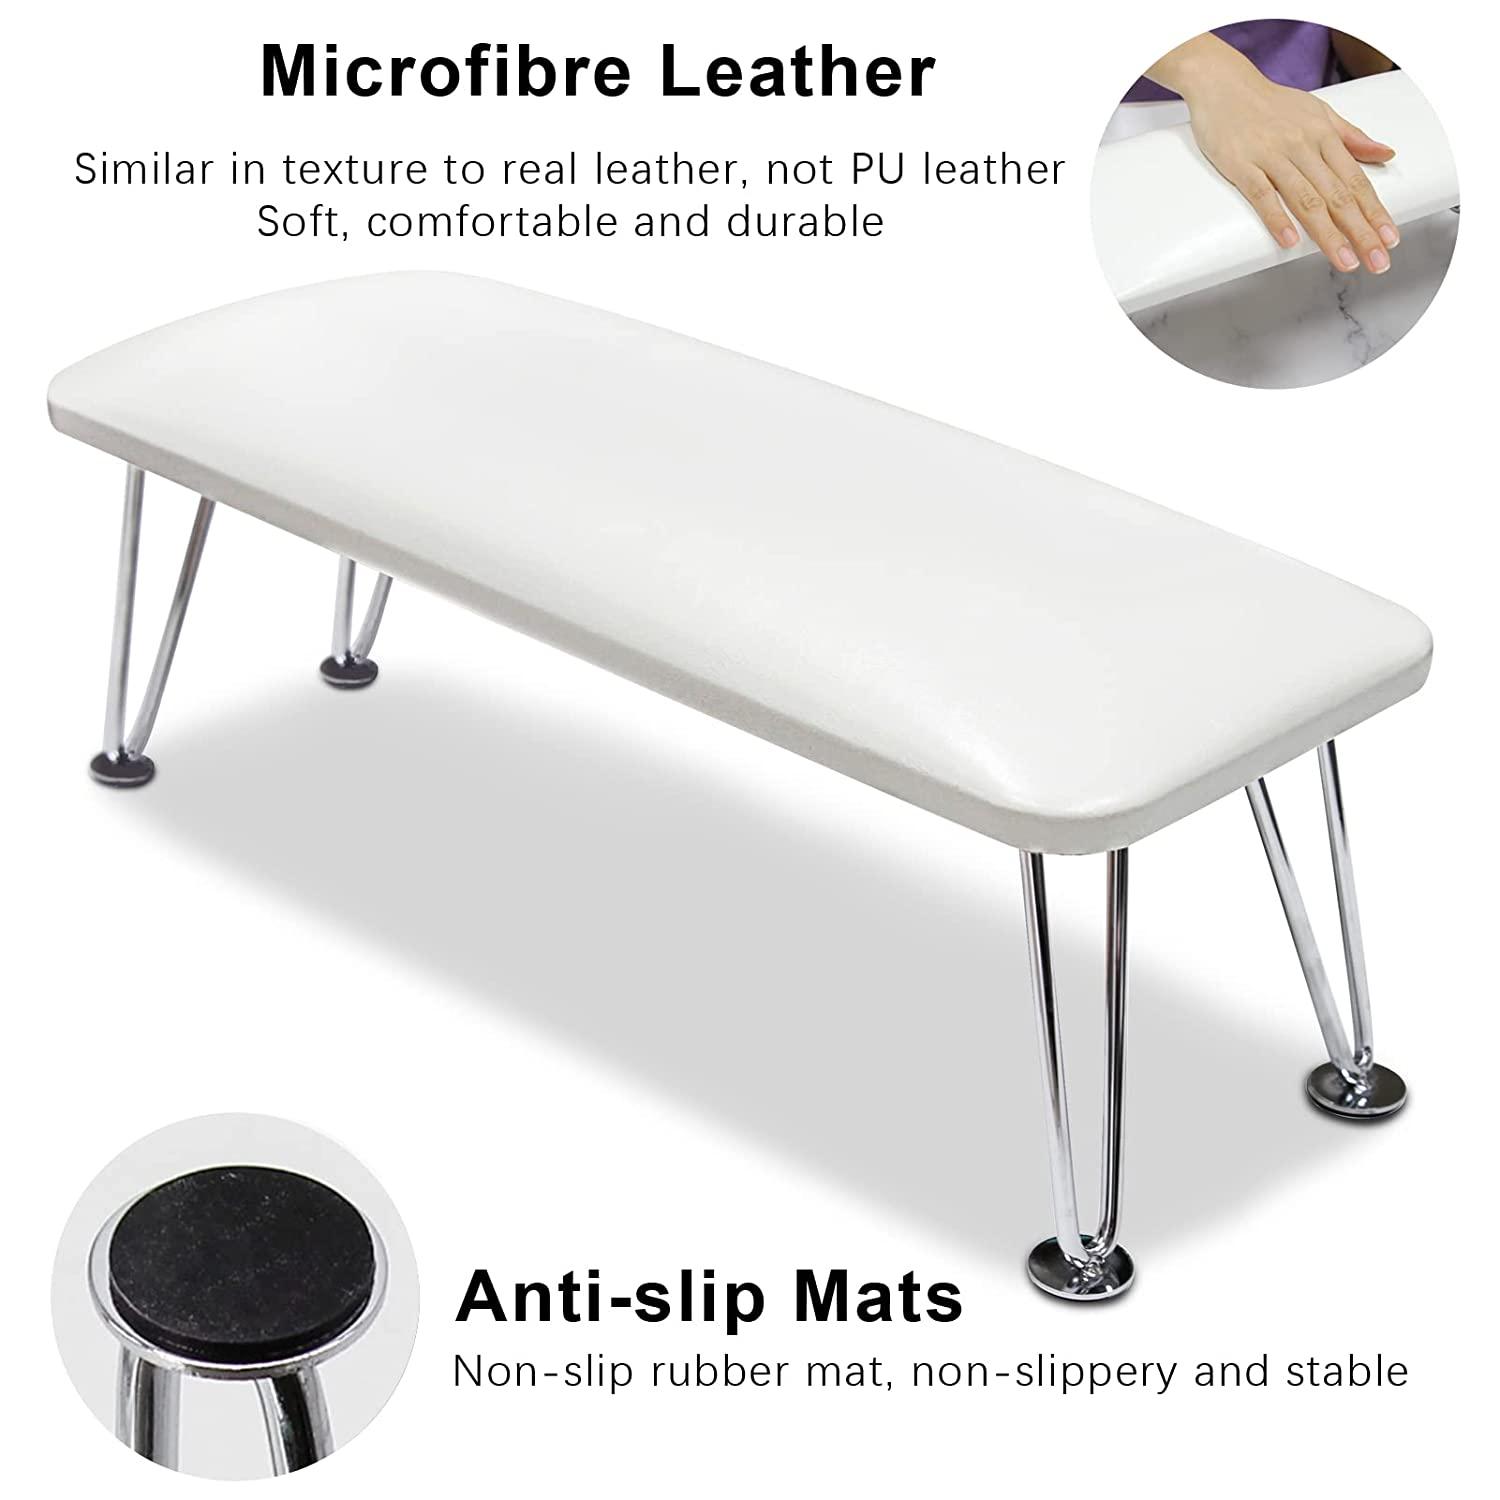 Foldable Nail Arm Rest, Pu Leather Nail Hand Rest For Nails Tech With Table  Mat, Soft Hand Rest Stand For Acrylic Nail